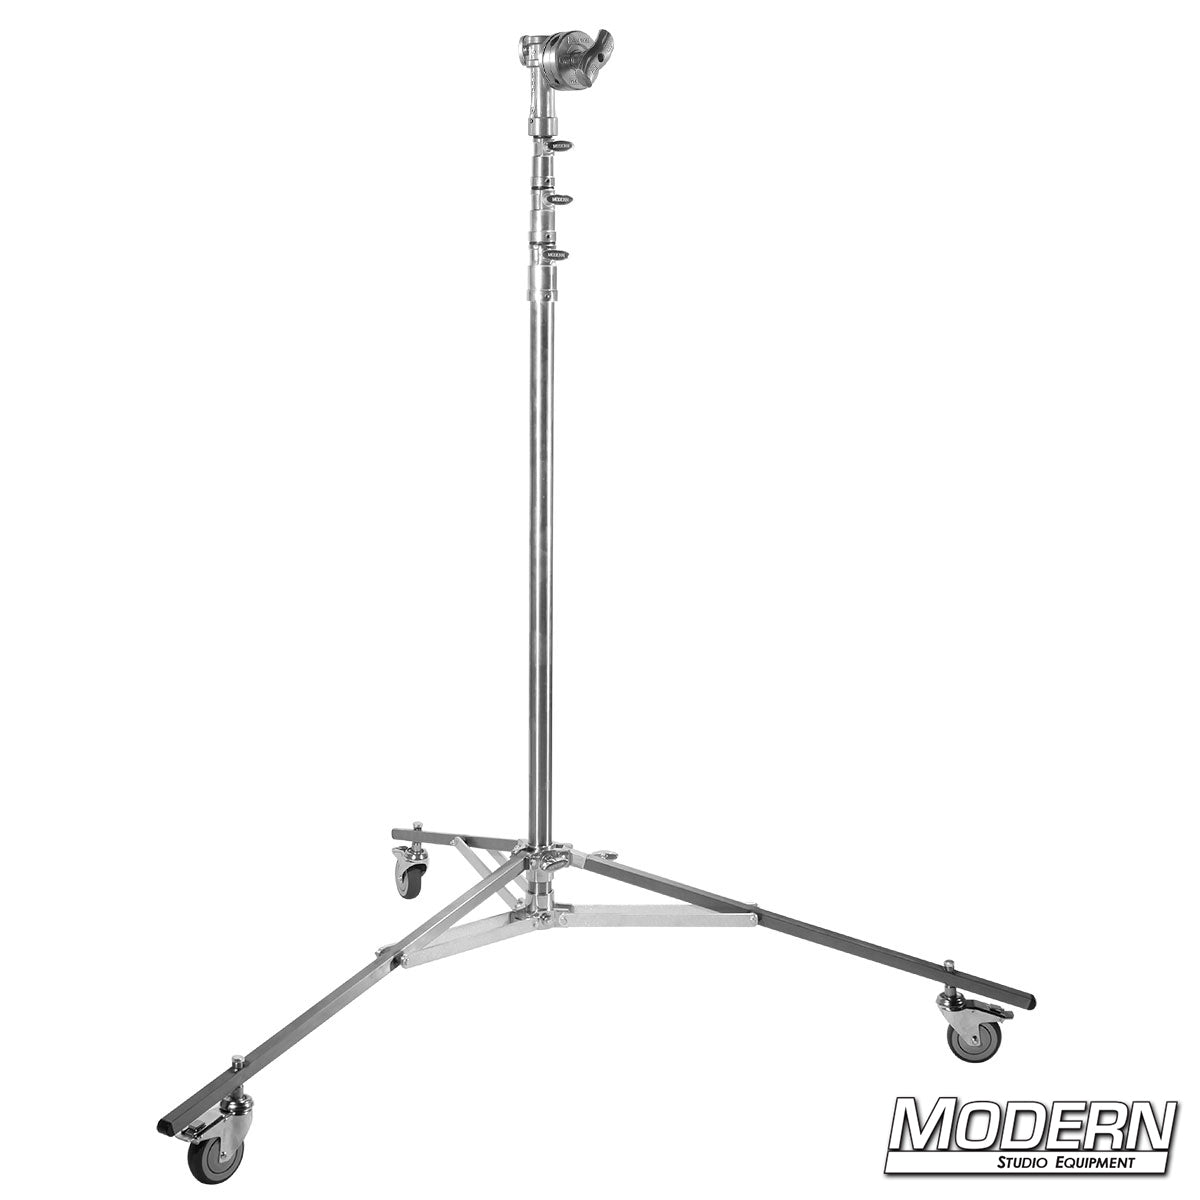 Hi-Hi Roller Stand with Rocky Mountain Leg and 4-1/2" Grip Head